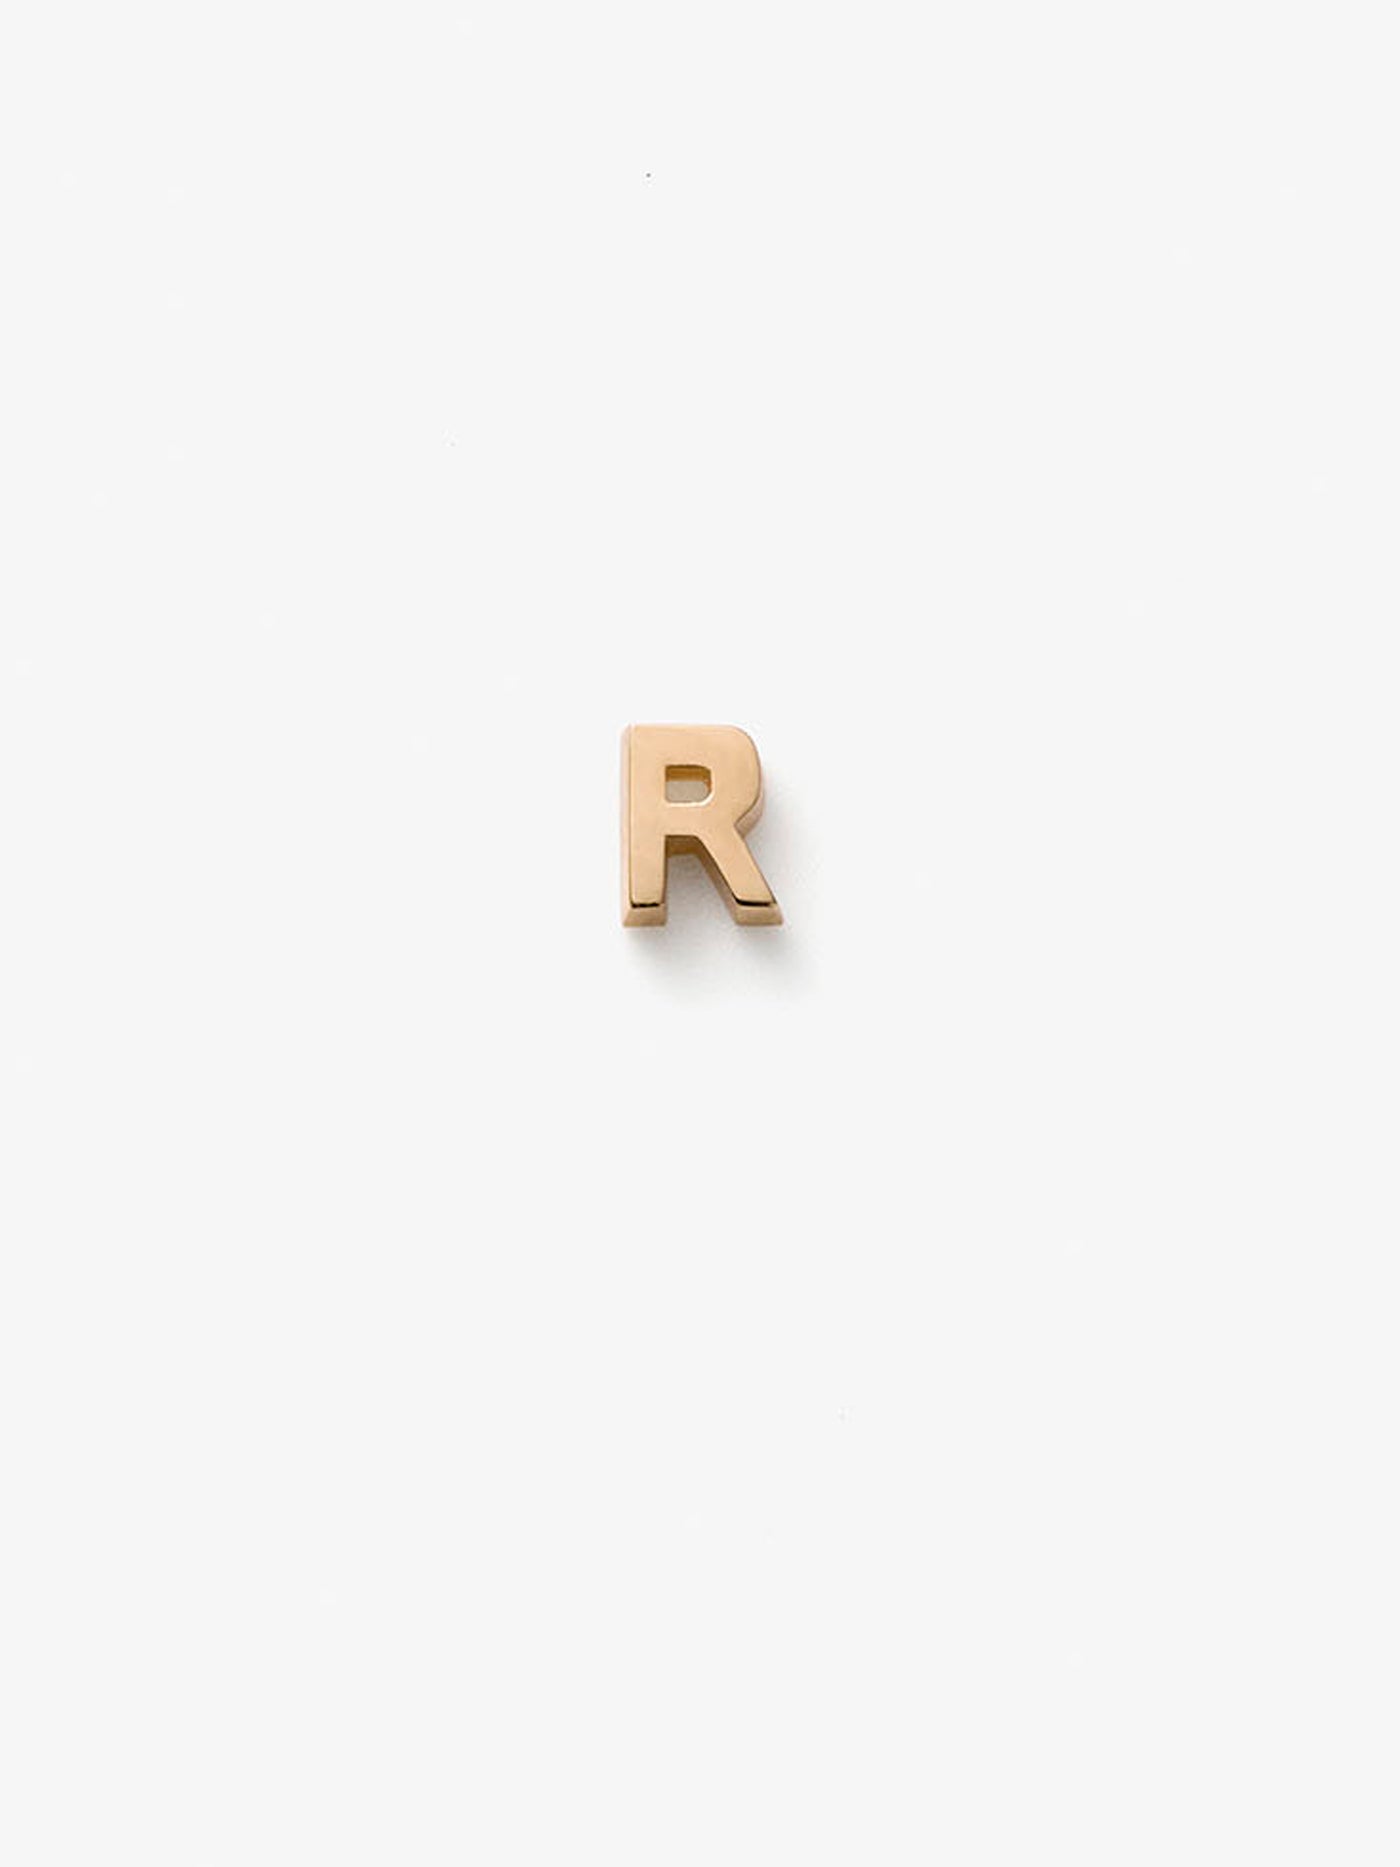 Miniature letter R single stud earring in 18k solid gold with a butterfly fastening for pierced ears